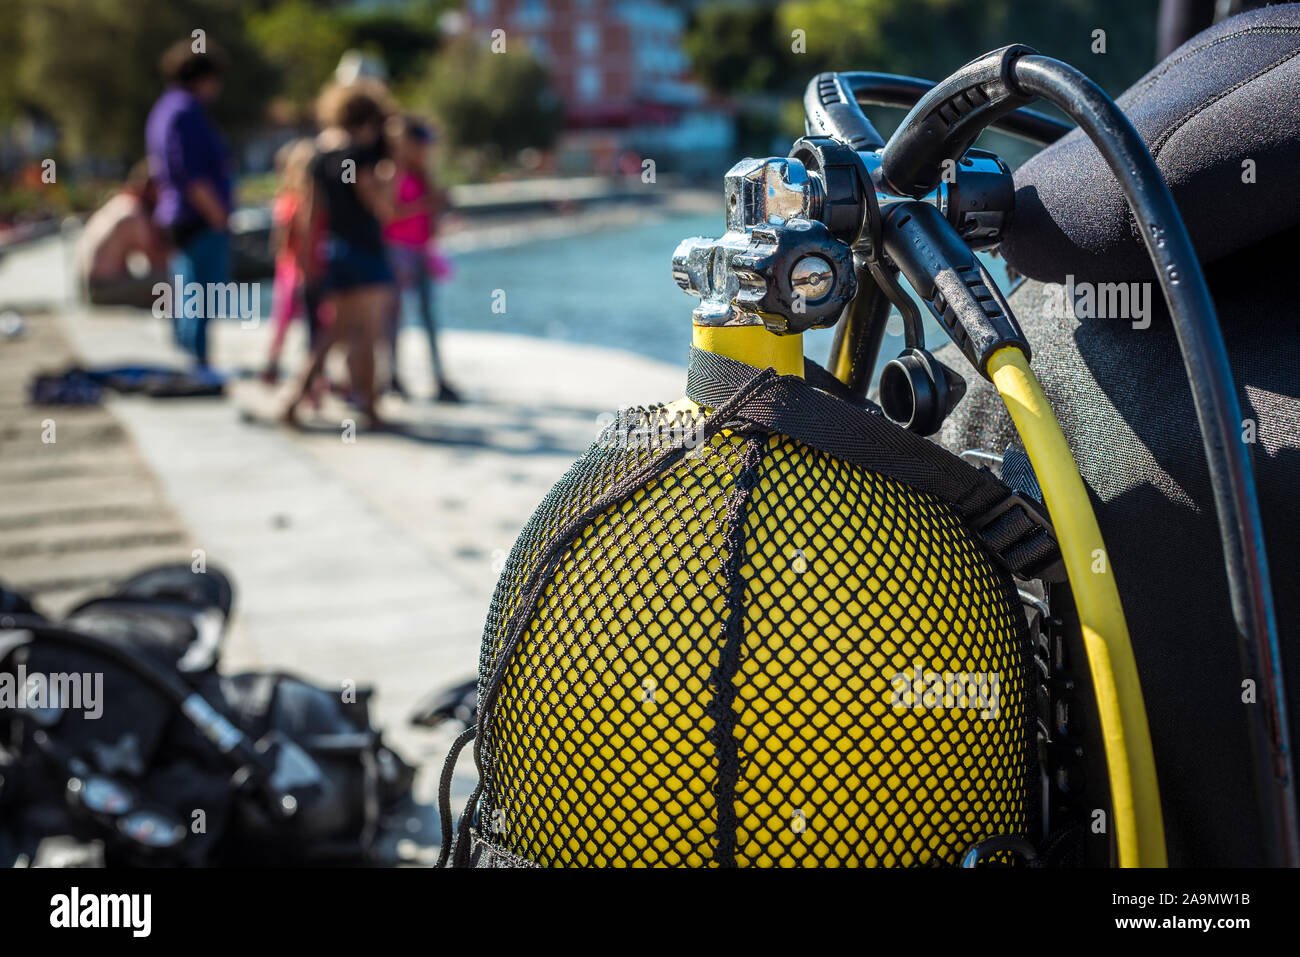 Scuba diver getting ready for scuba diving on the beach. Setting up scuba gear and equipment - steel tank or cylinder, BCD, regulators and getting dre Stock Photo